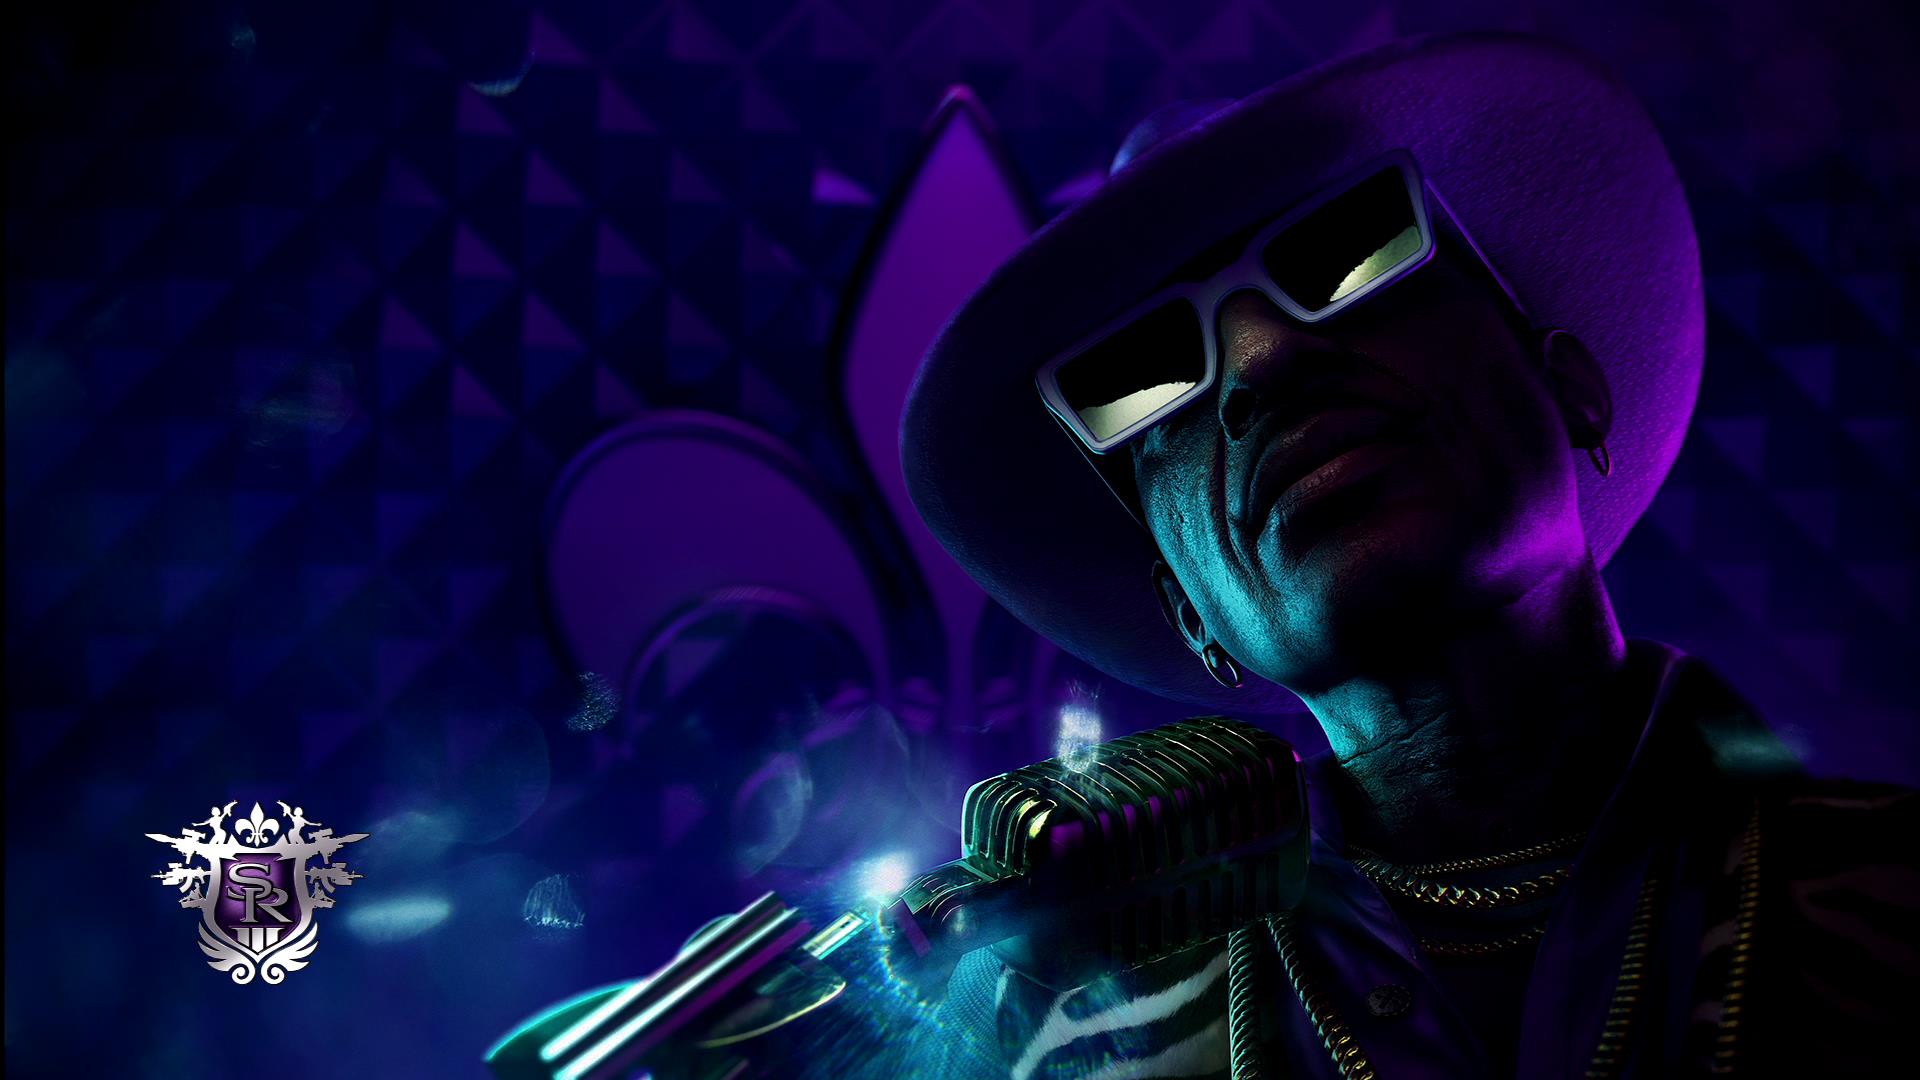 saints row 3 release date download free